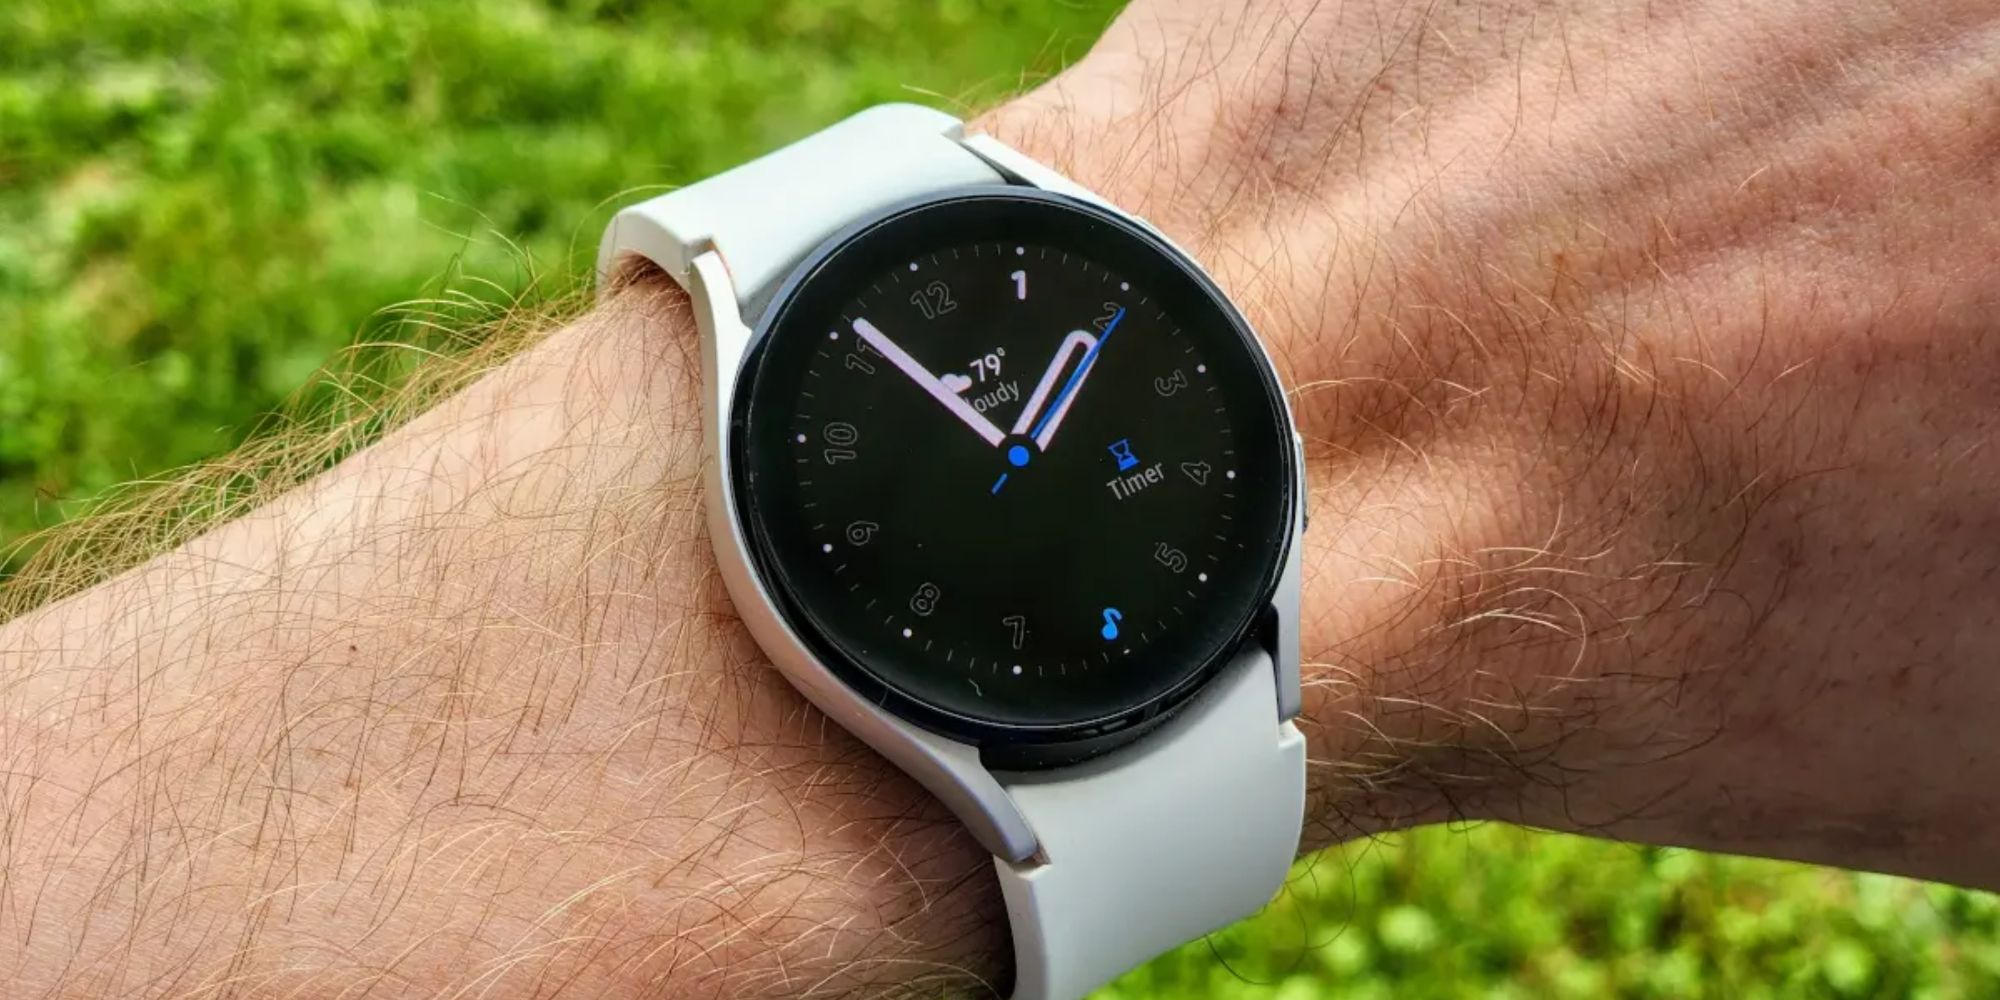 The Galaxy Watch 5 on a wrist shows the clock face.